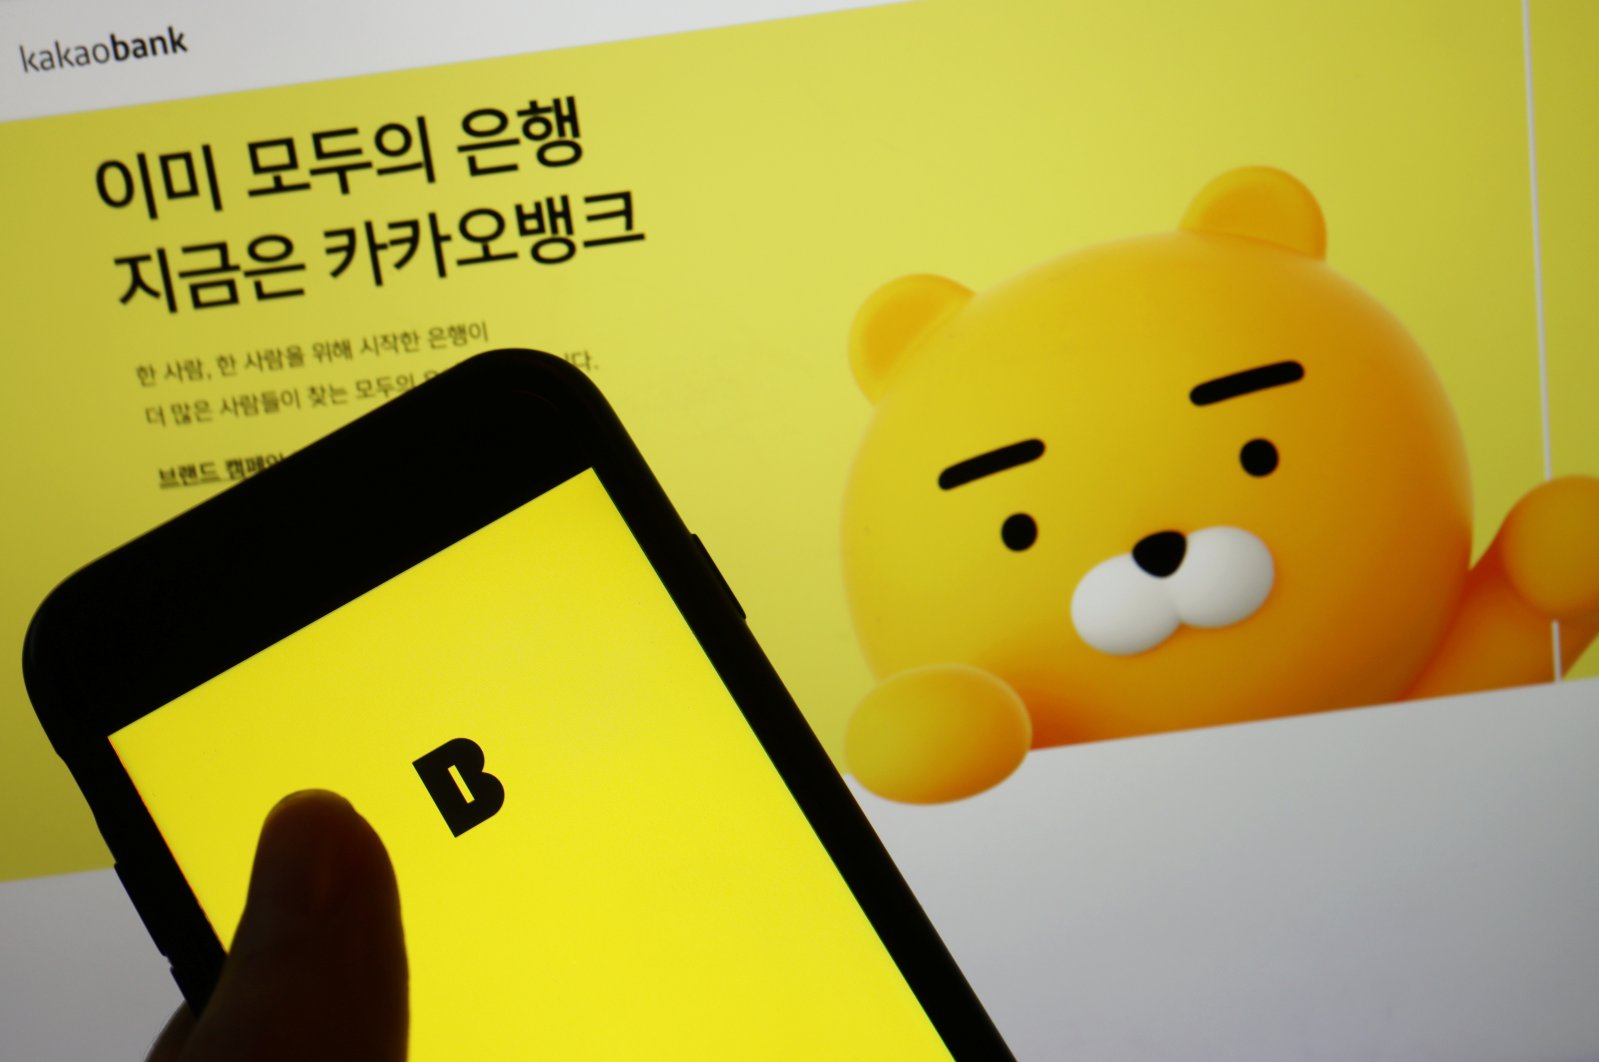 The Kakao Bank app is seen on a mobile phone screen displayed in front of the South Korean digital lender's website in this illustration picture taken Aug. 6, 2021. (Reuters Photo)